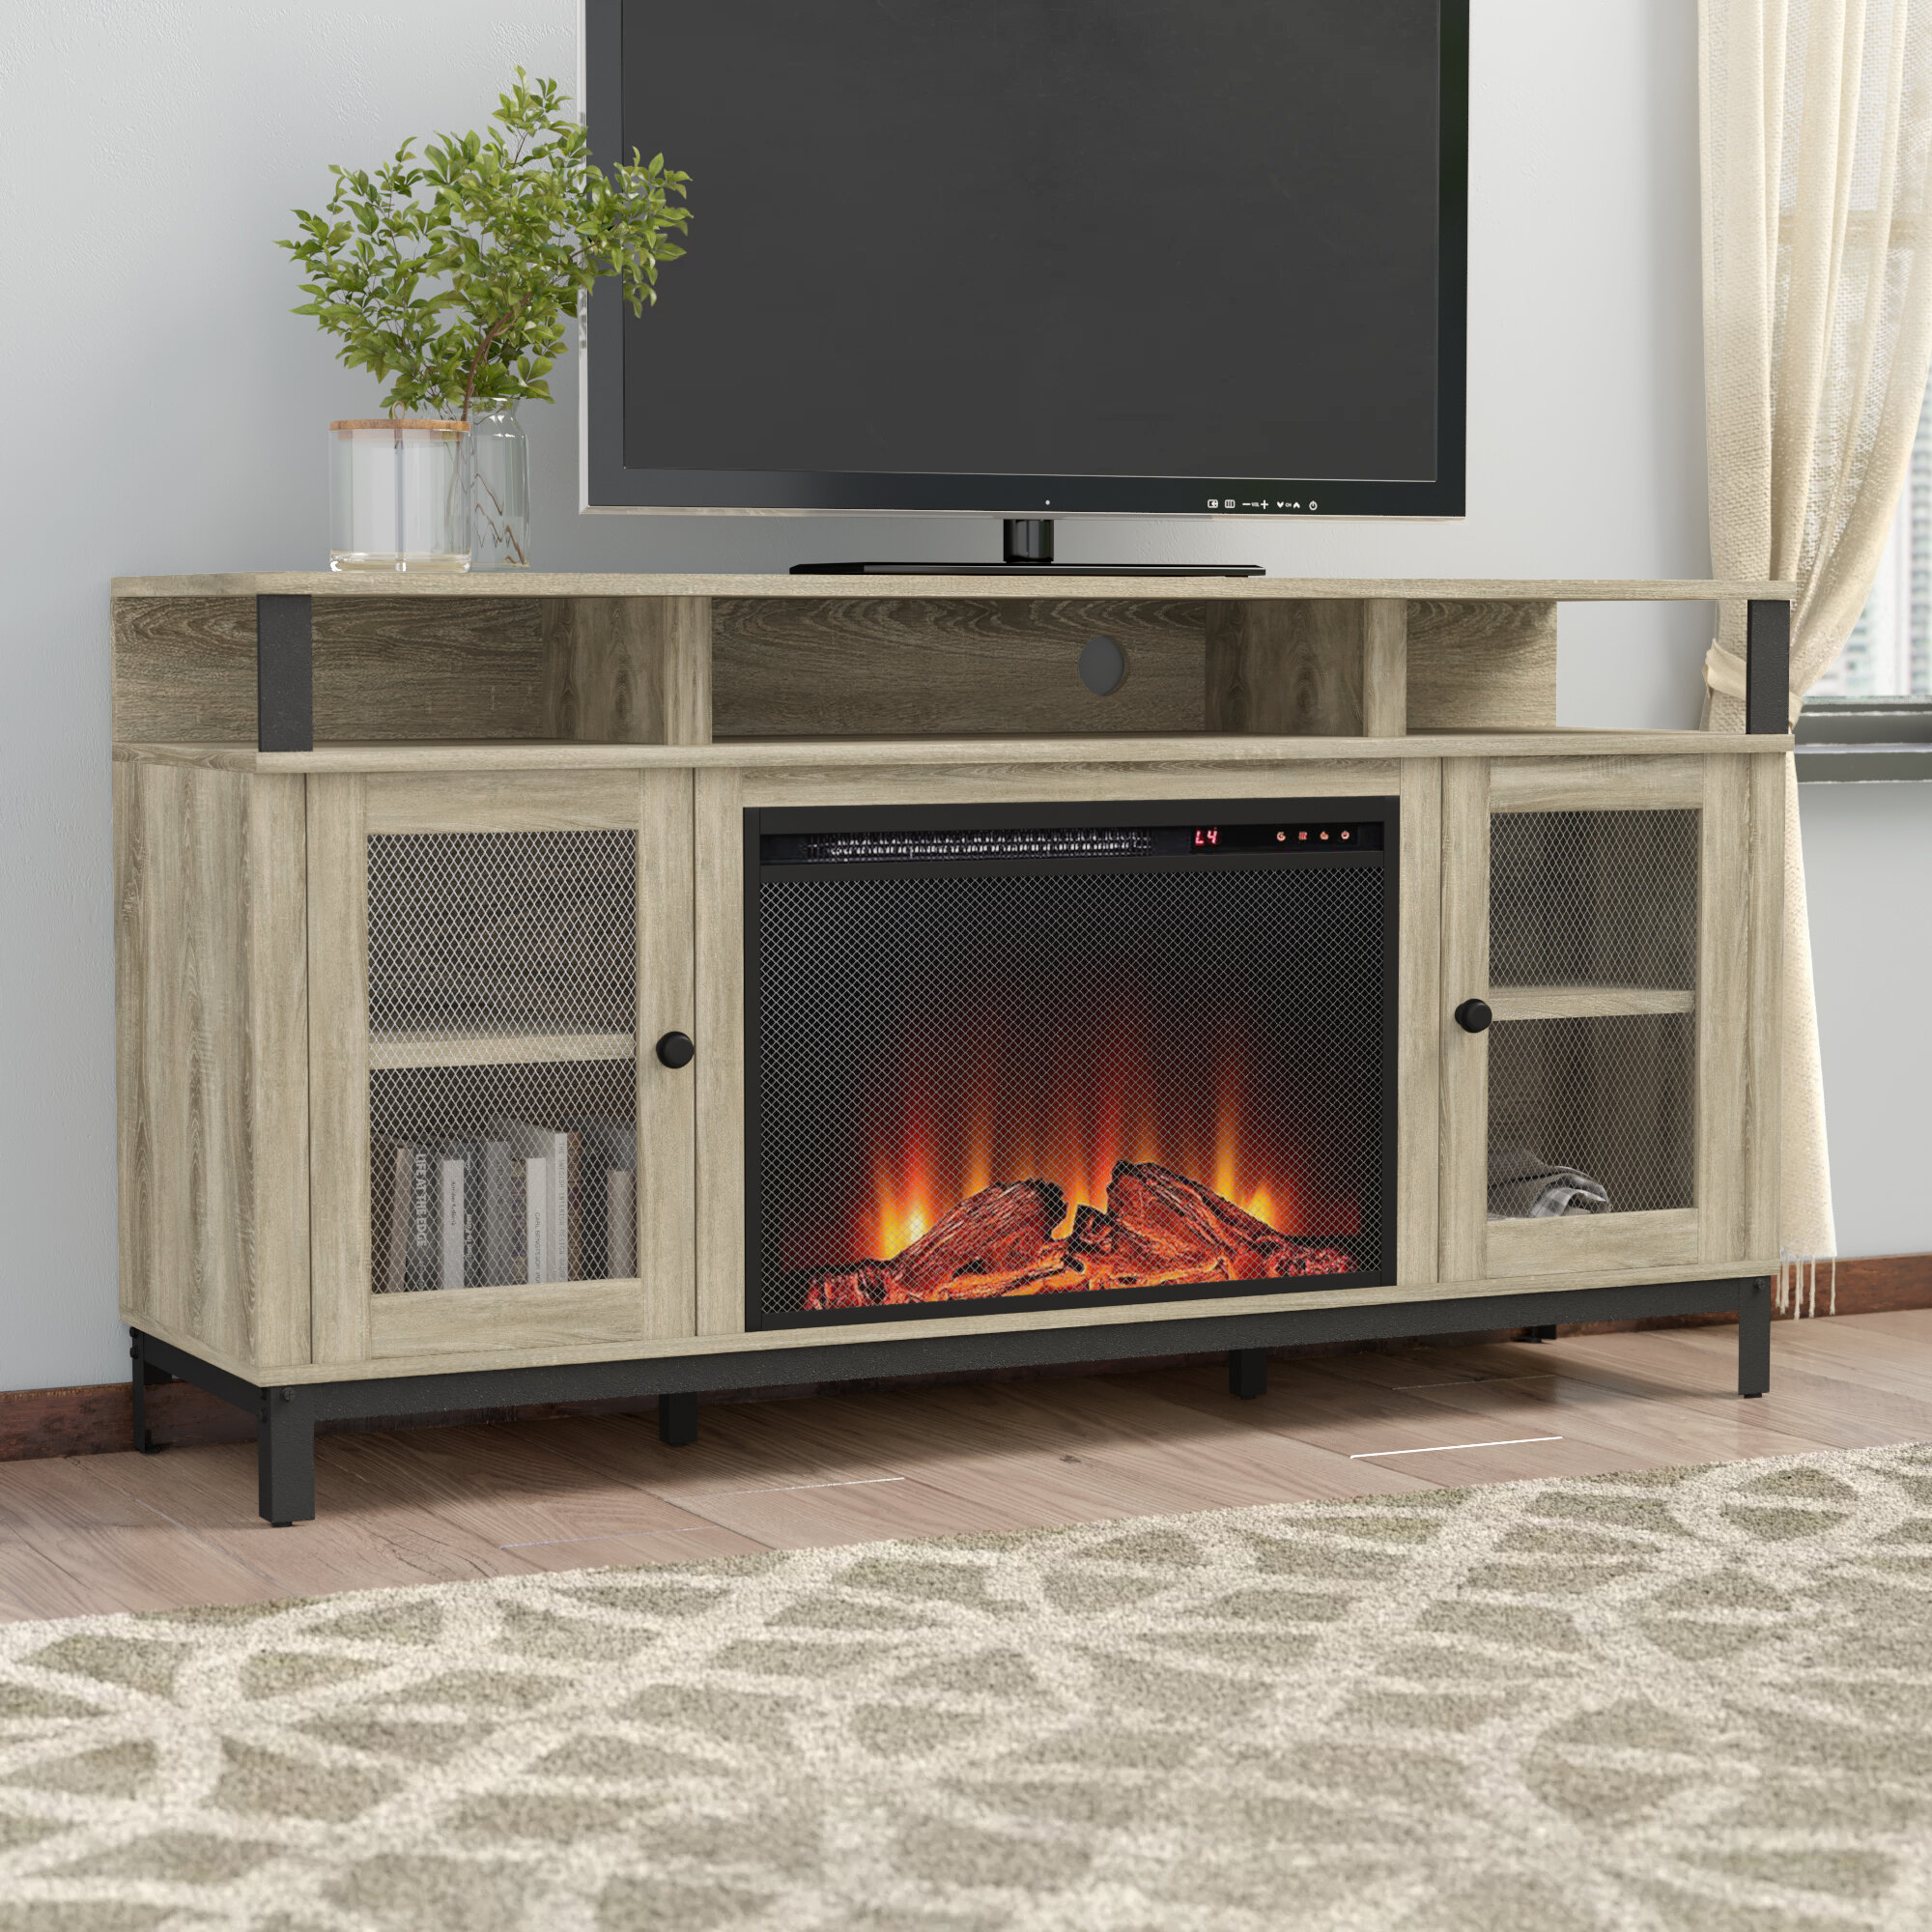 Sliding Barn Door Tv Stand with Fireplace New Fireplace Gracie Oaks Tv Stands You Ll Love In 2019